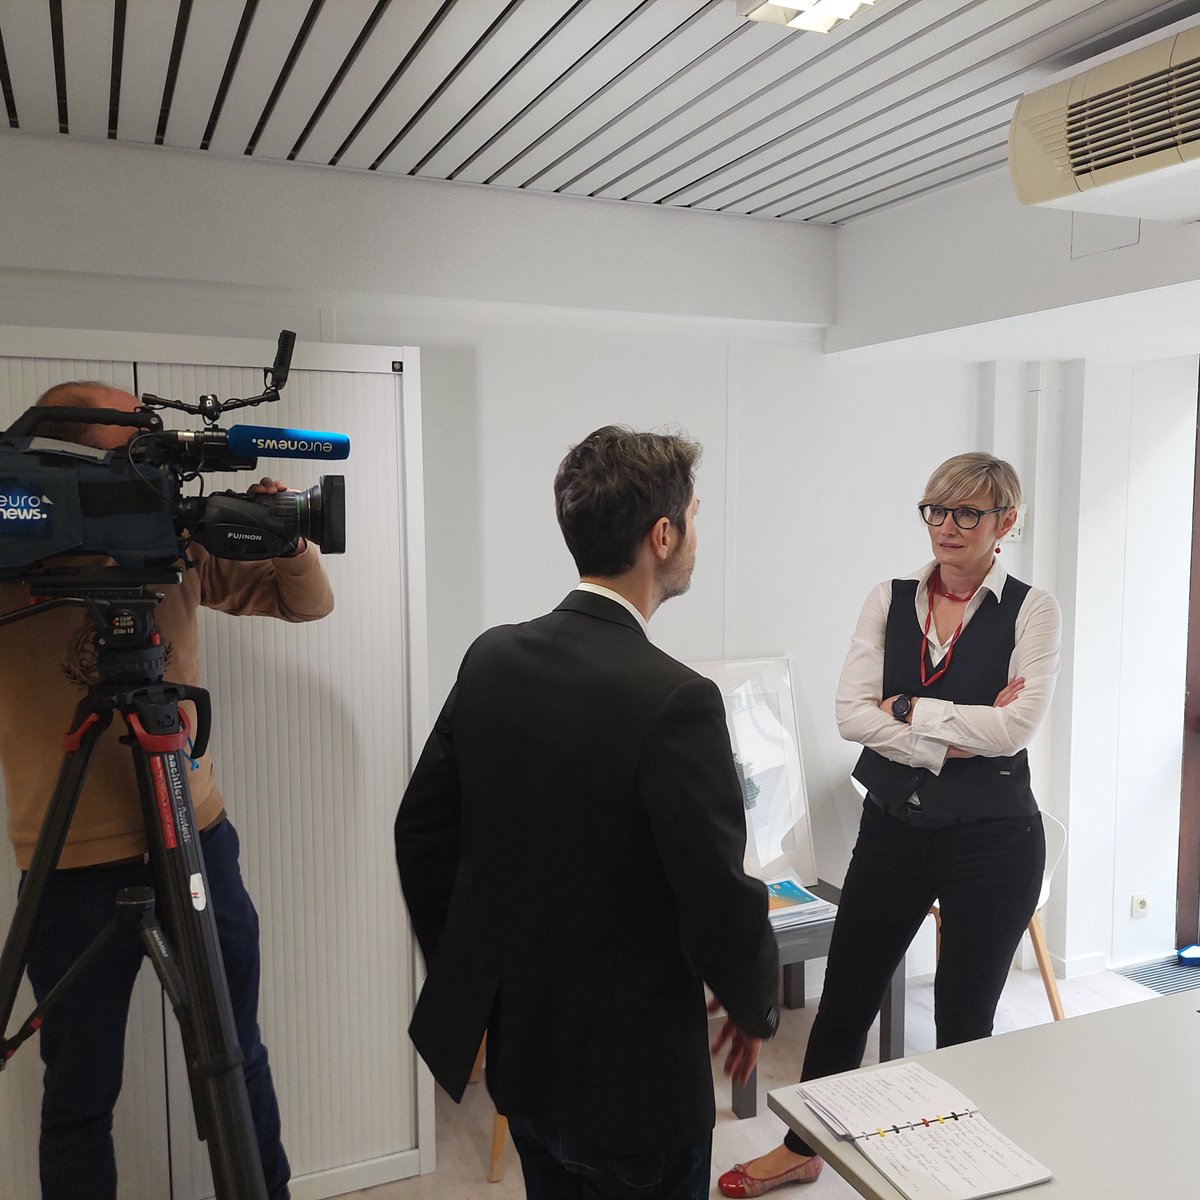 Our @milkasklvc with @GrLory of @euronews talking Health in @Europarl_EN elections #UseYourVote 📢📹🇪🇺 Key take away: EU did a lot in last 5yrs, esp. on #Covid #vaccines As we leave #pandemic behind we need to ensure we don't forget its lessons! #HealthEquity #HealthPriority